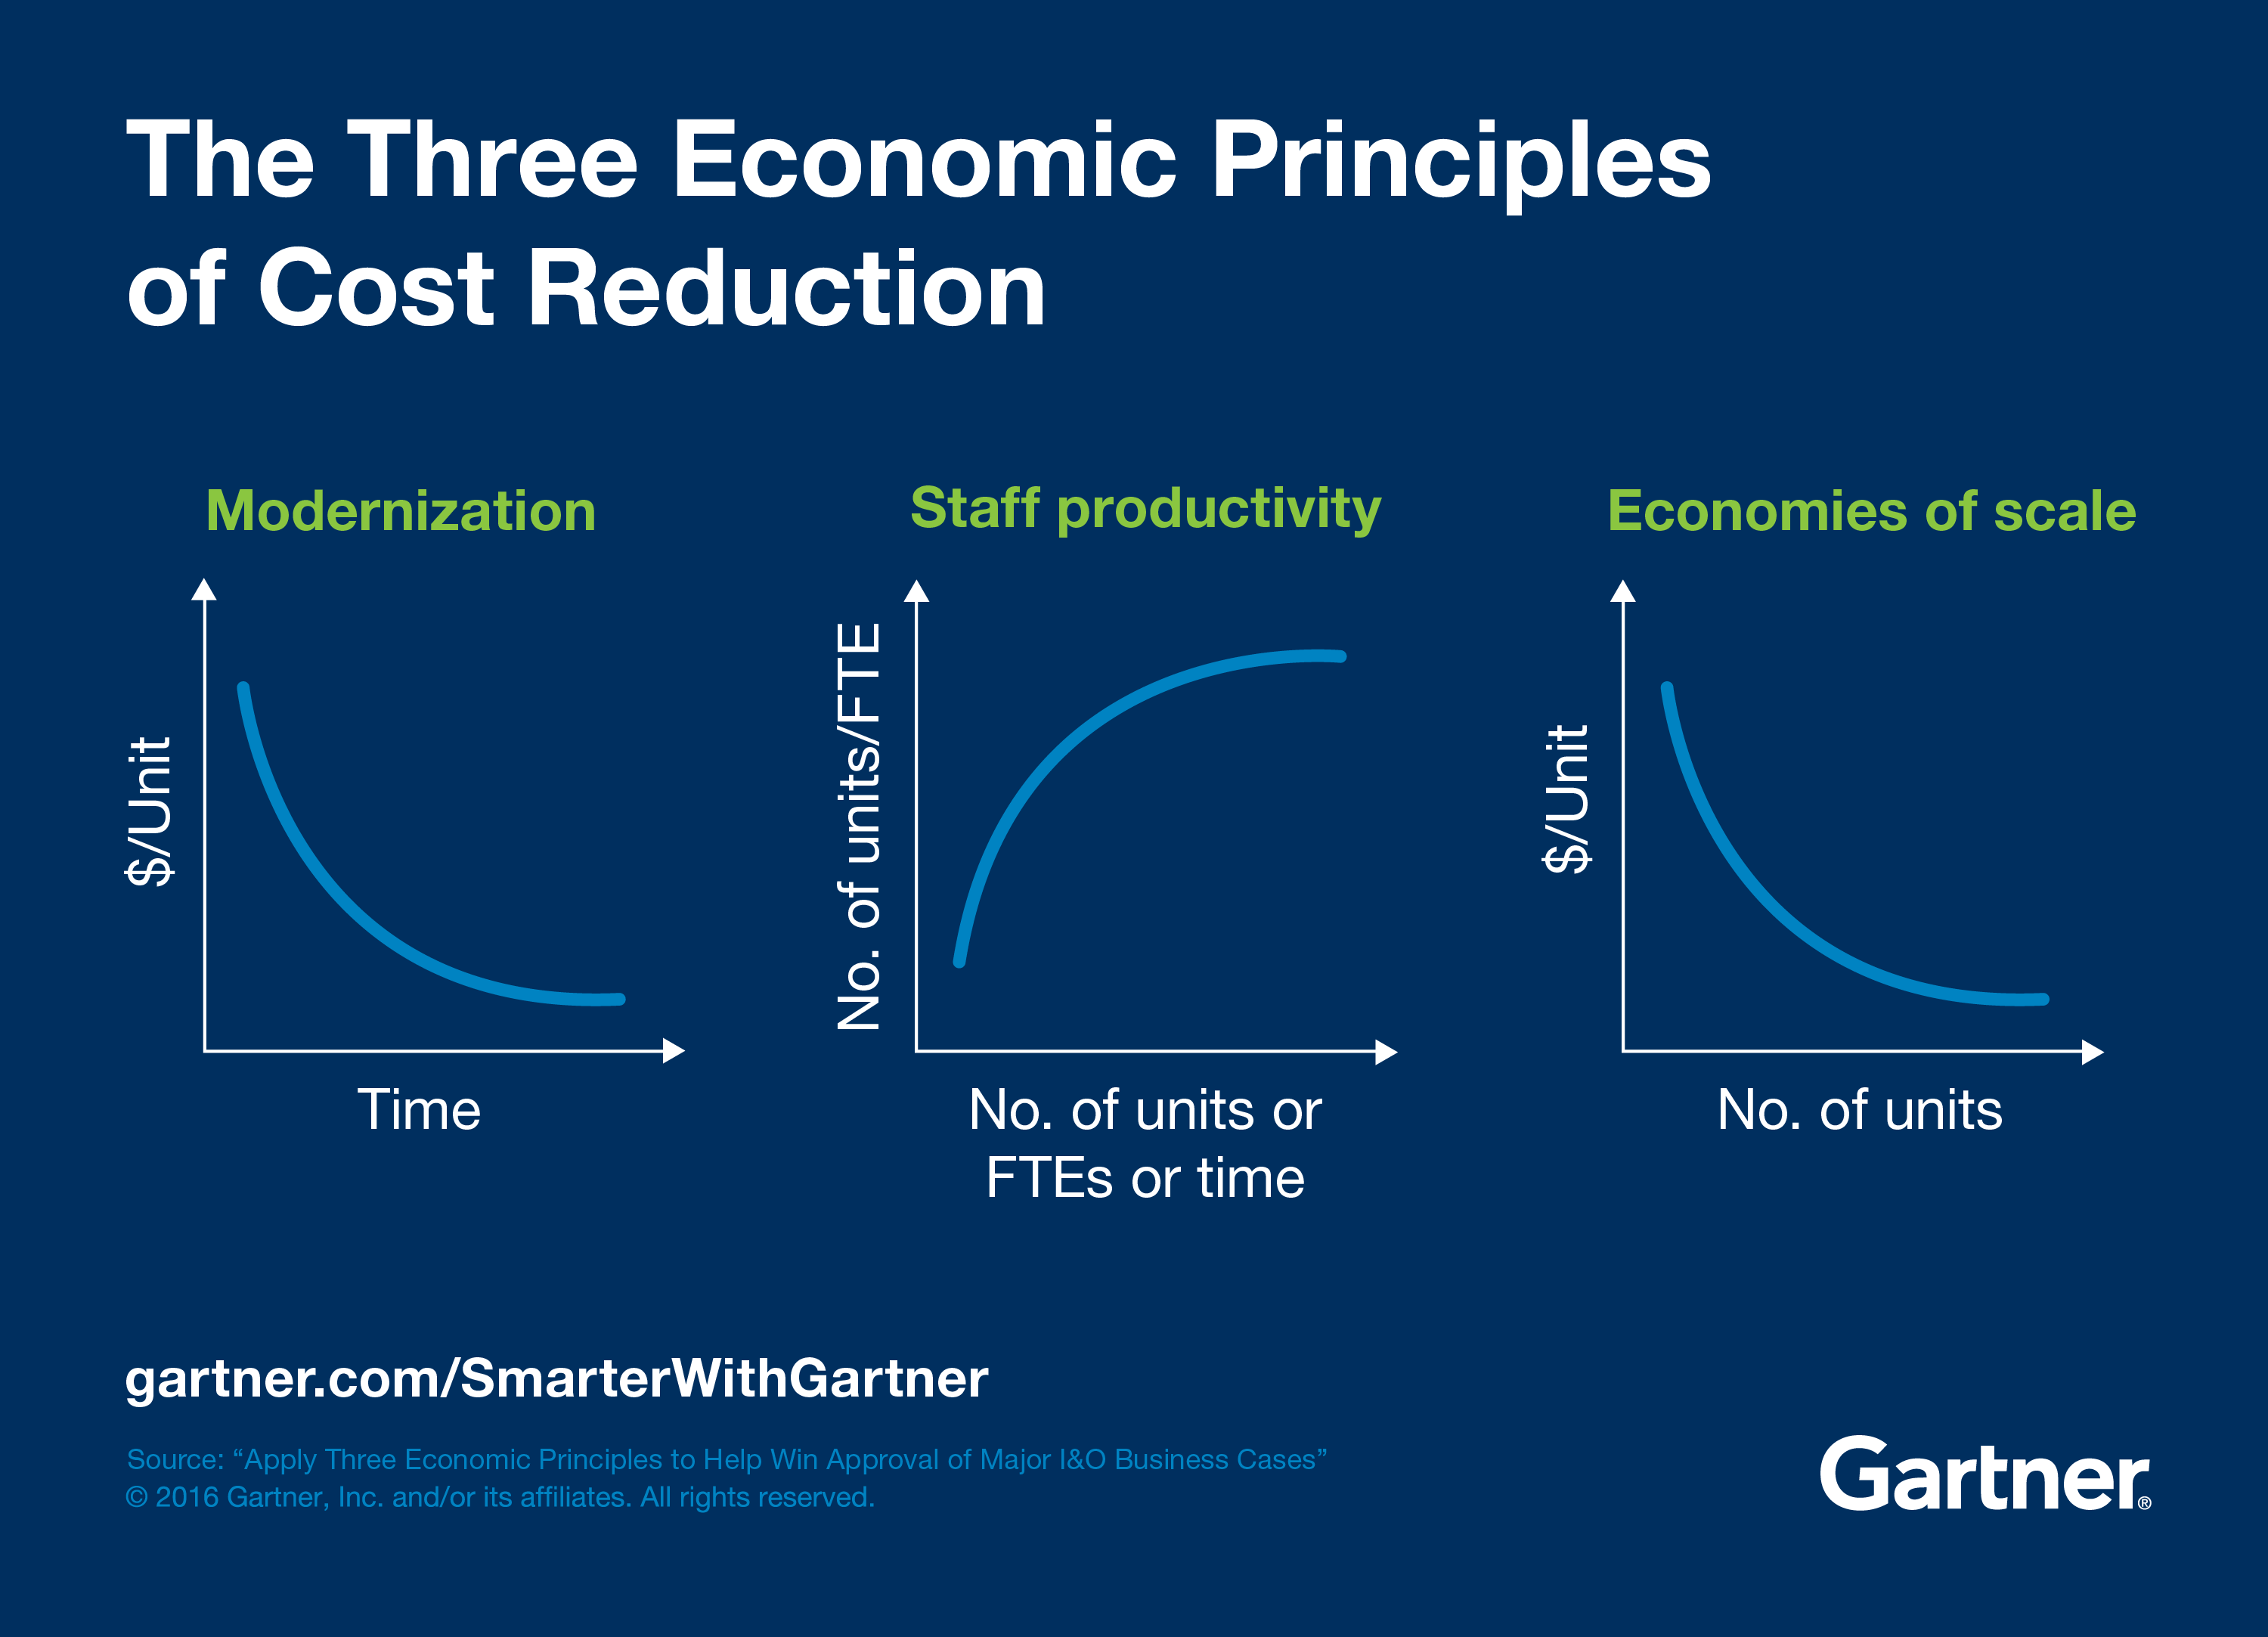 The Three Economic Principles of Cost Reduction